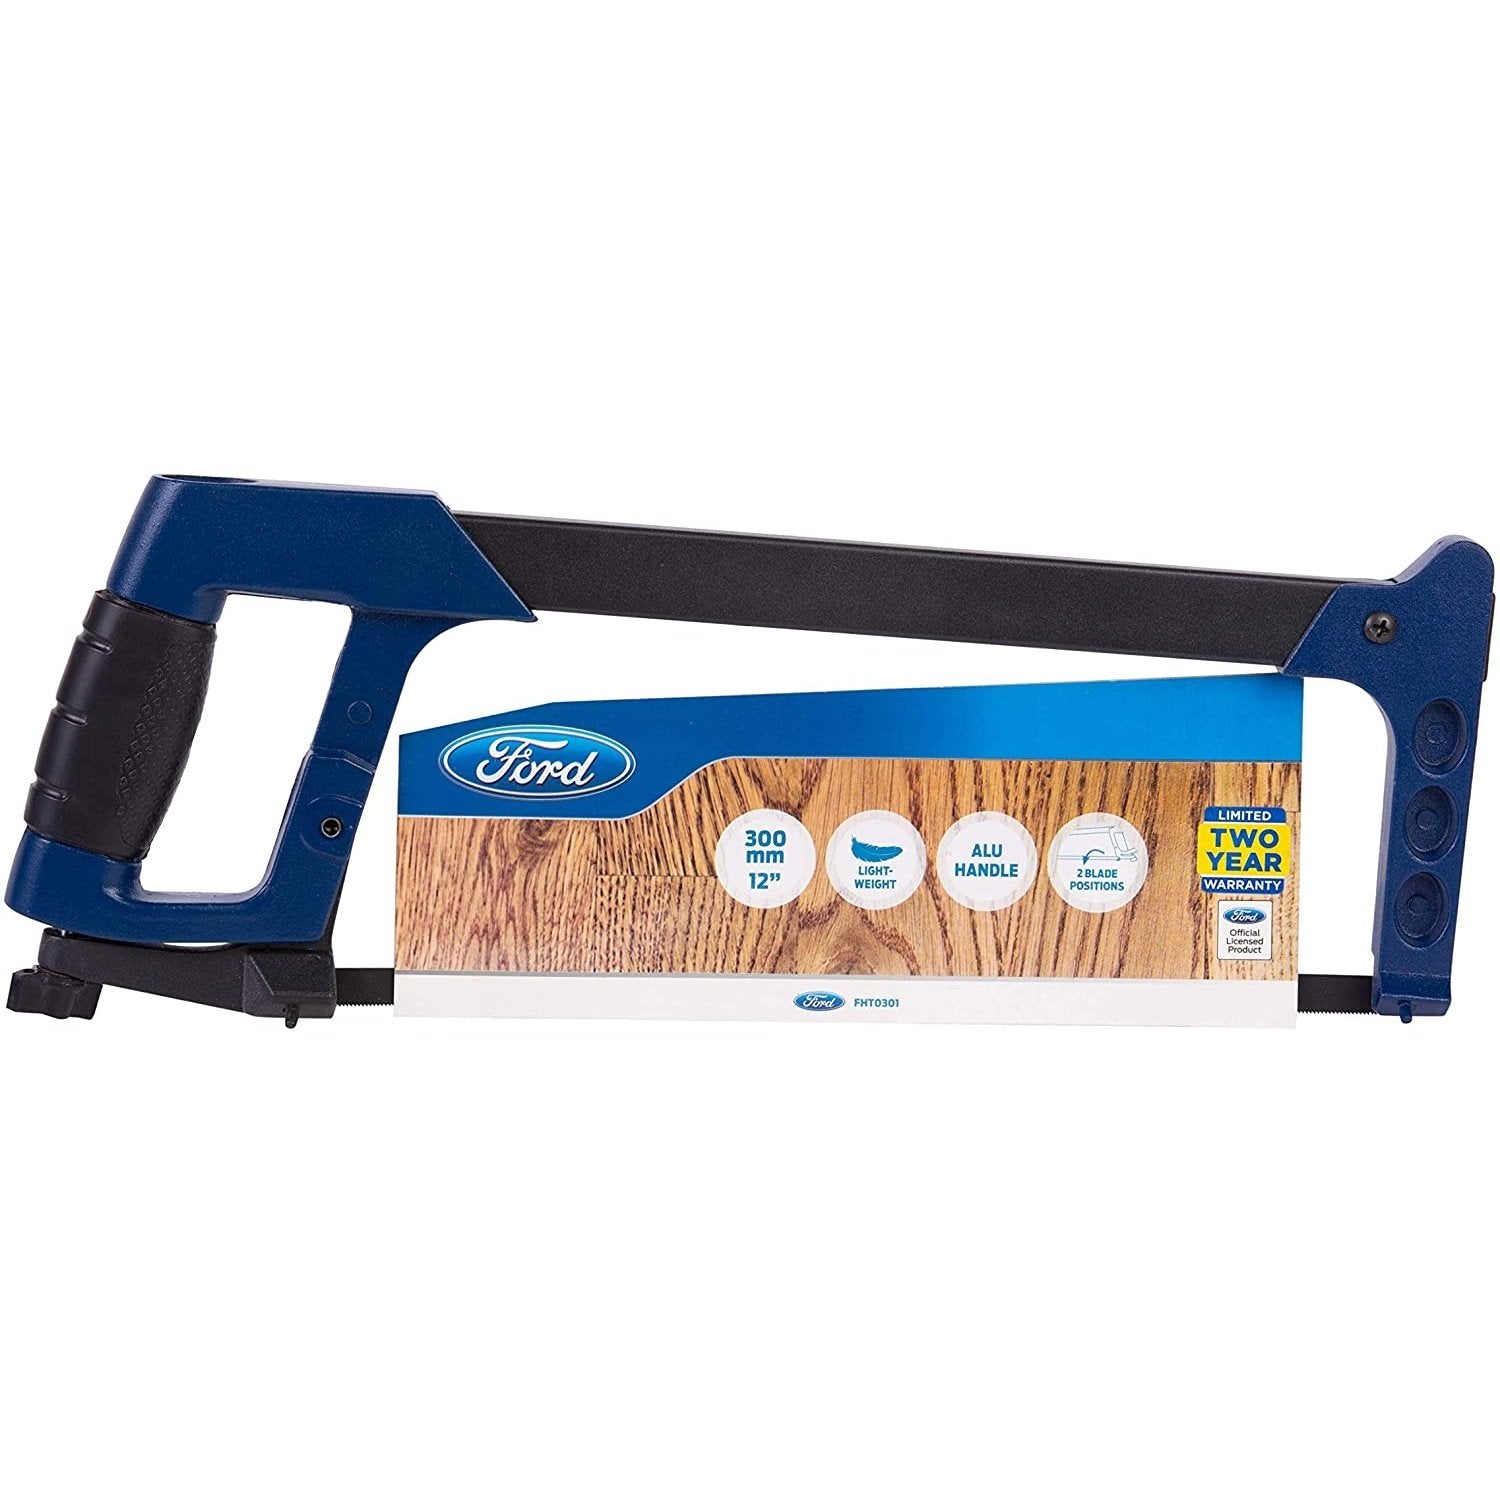 Ford 12" Dual Angle Hacksaw - FHT0301 | Supply Master | Accra, Ghana Tools Building Steel Engineering Hardware tool